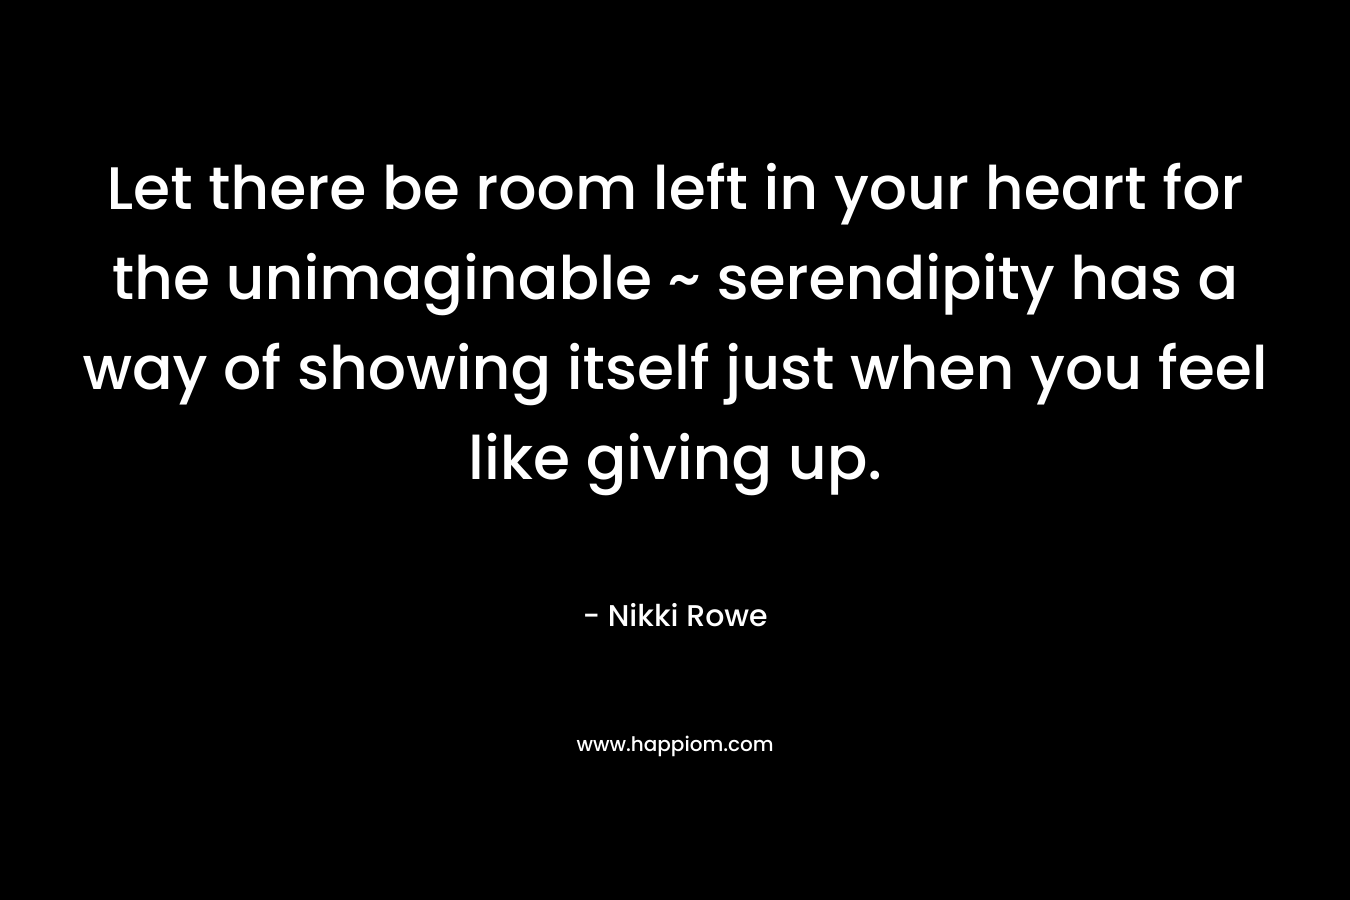 Let there be room left in your heart for the unimaginable ~ serendipity has a way of showing itself just when you feel like giving up. – Nikki Rowe